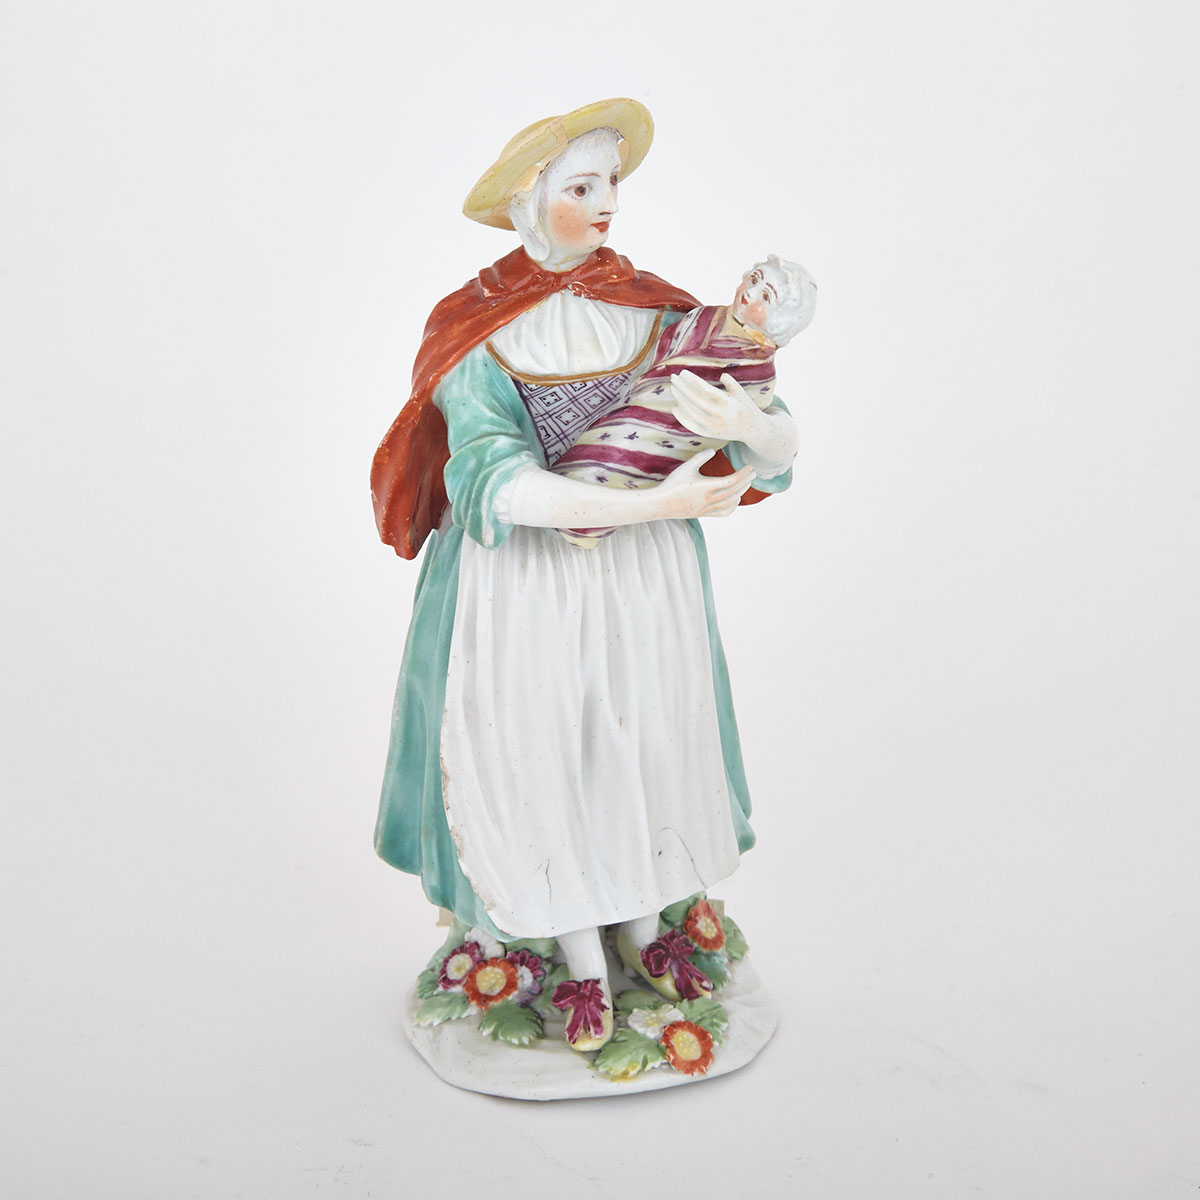 Derby Figure of a Woman Holding a Child, c.1765-70